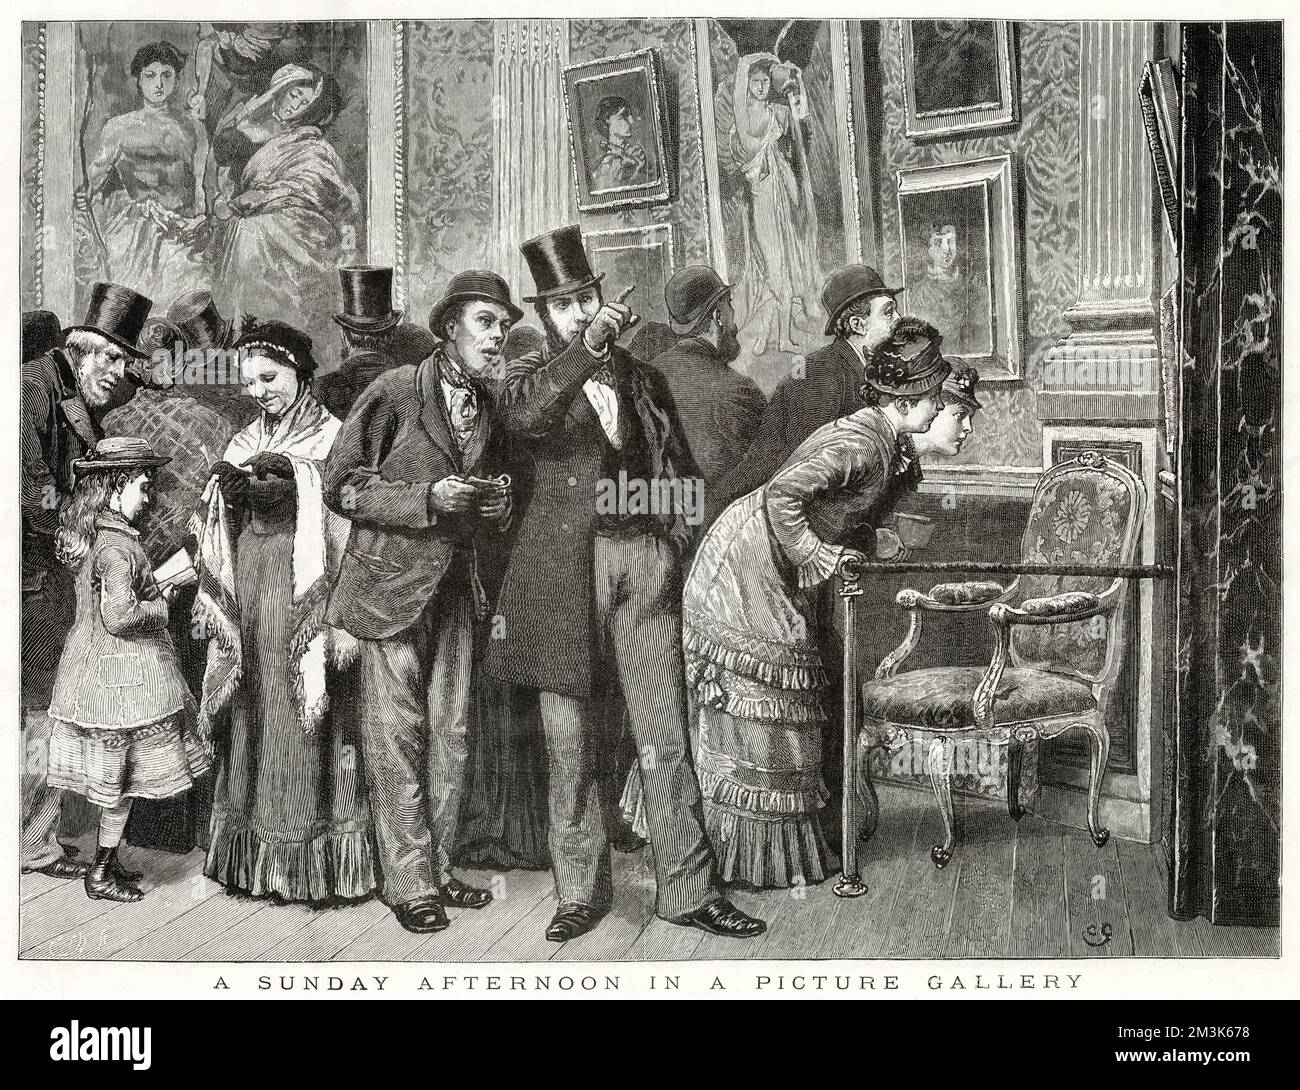 A group of Victorian Britons admiring the paintings in an art gallery, 1879. Engraving was originally entitled 'Sunday Afternoon in a Picture Gallery' and was 'drawn from life'. Stock Photo